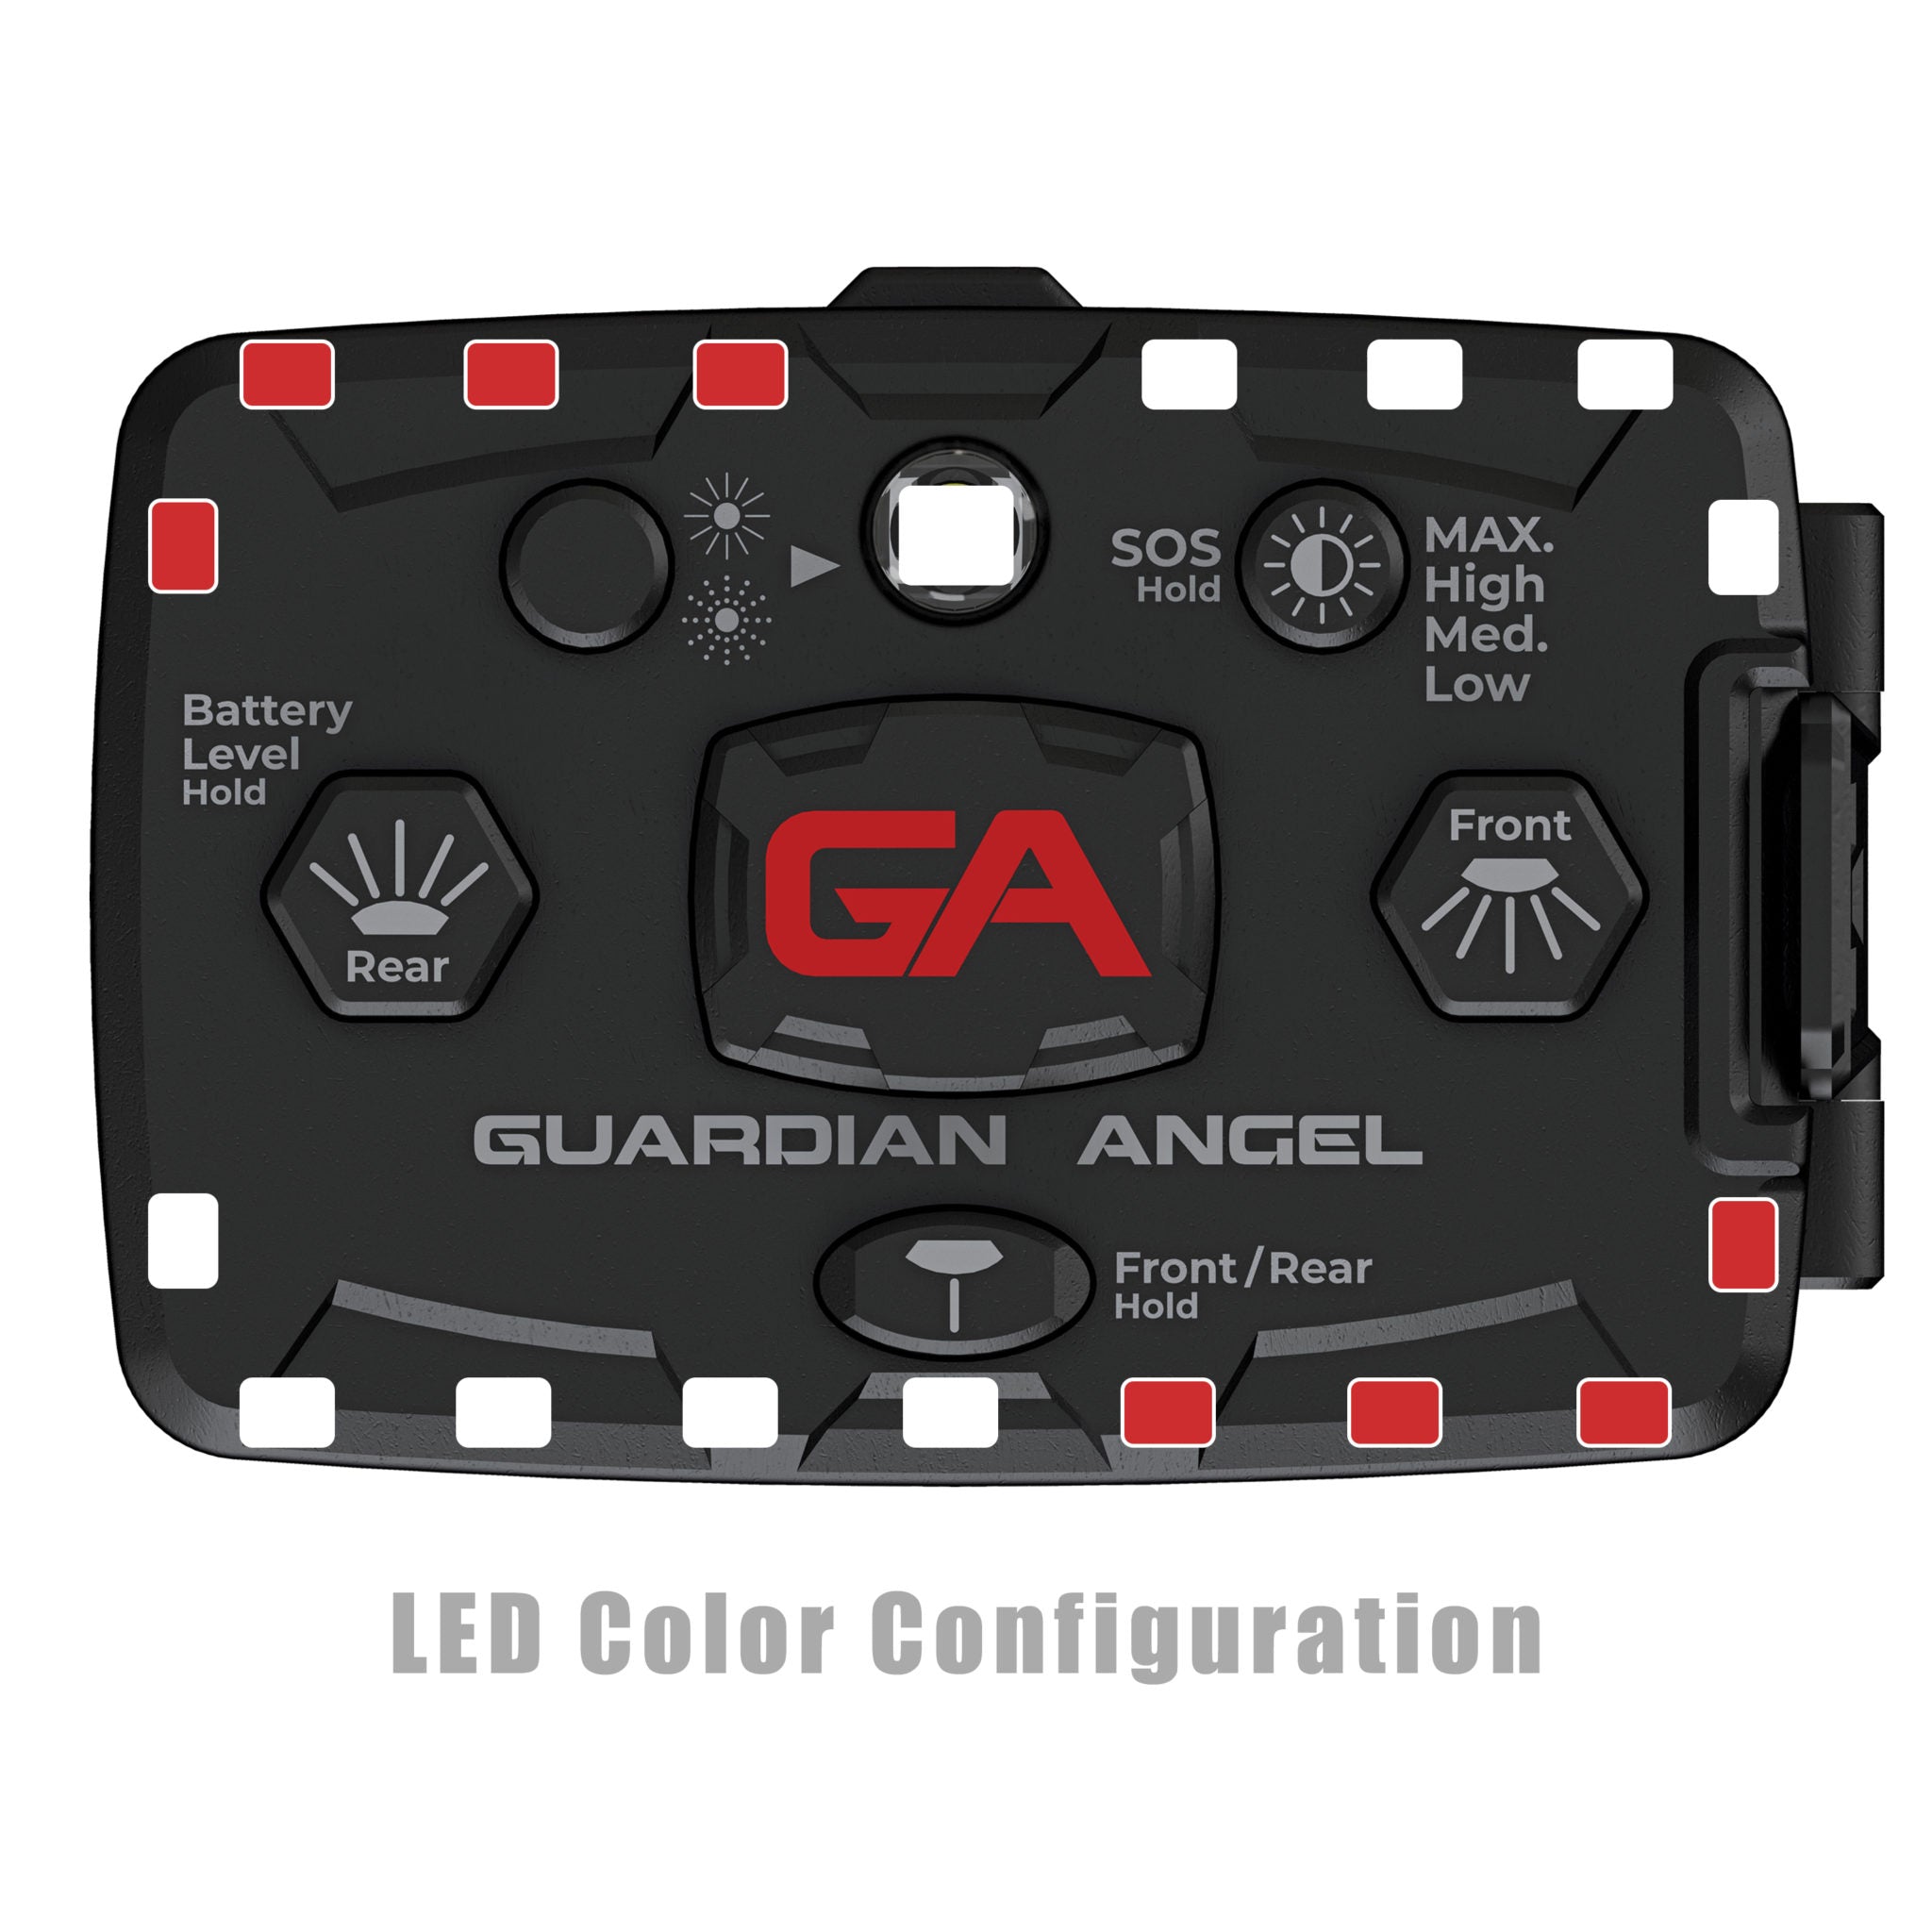 Guardian Angel Elite White/Red & White/Red Wearable Safety Light (ELT-WR/WR)